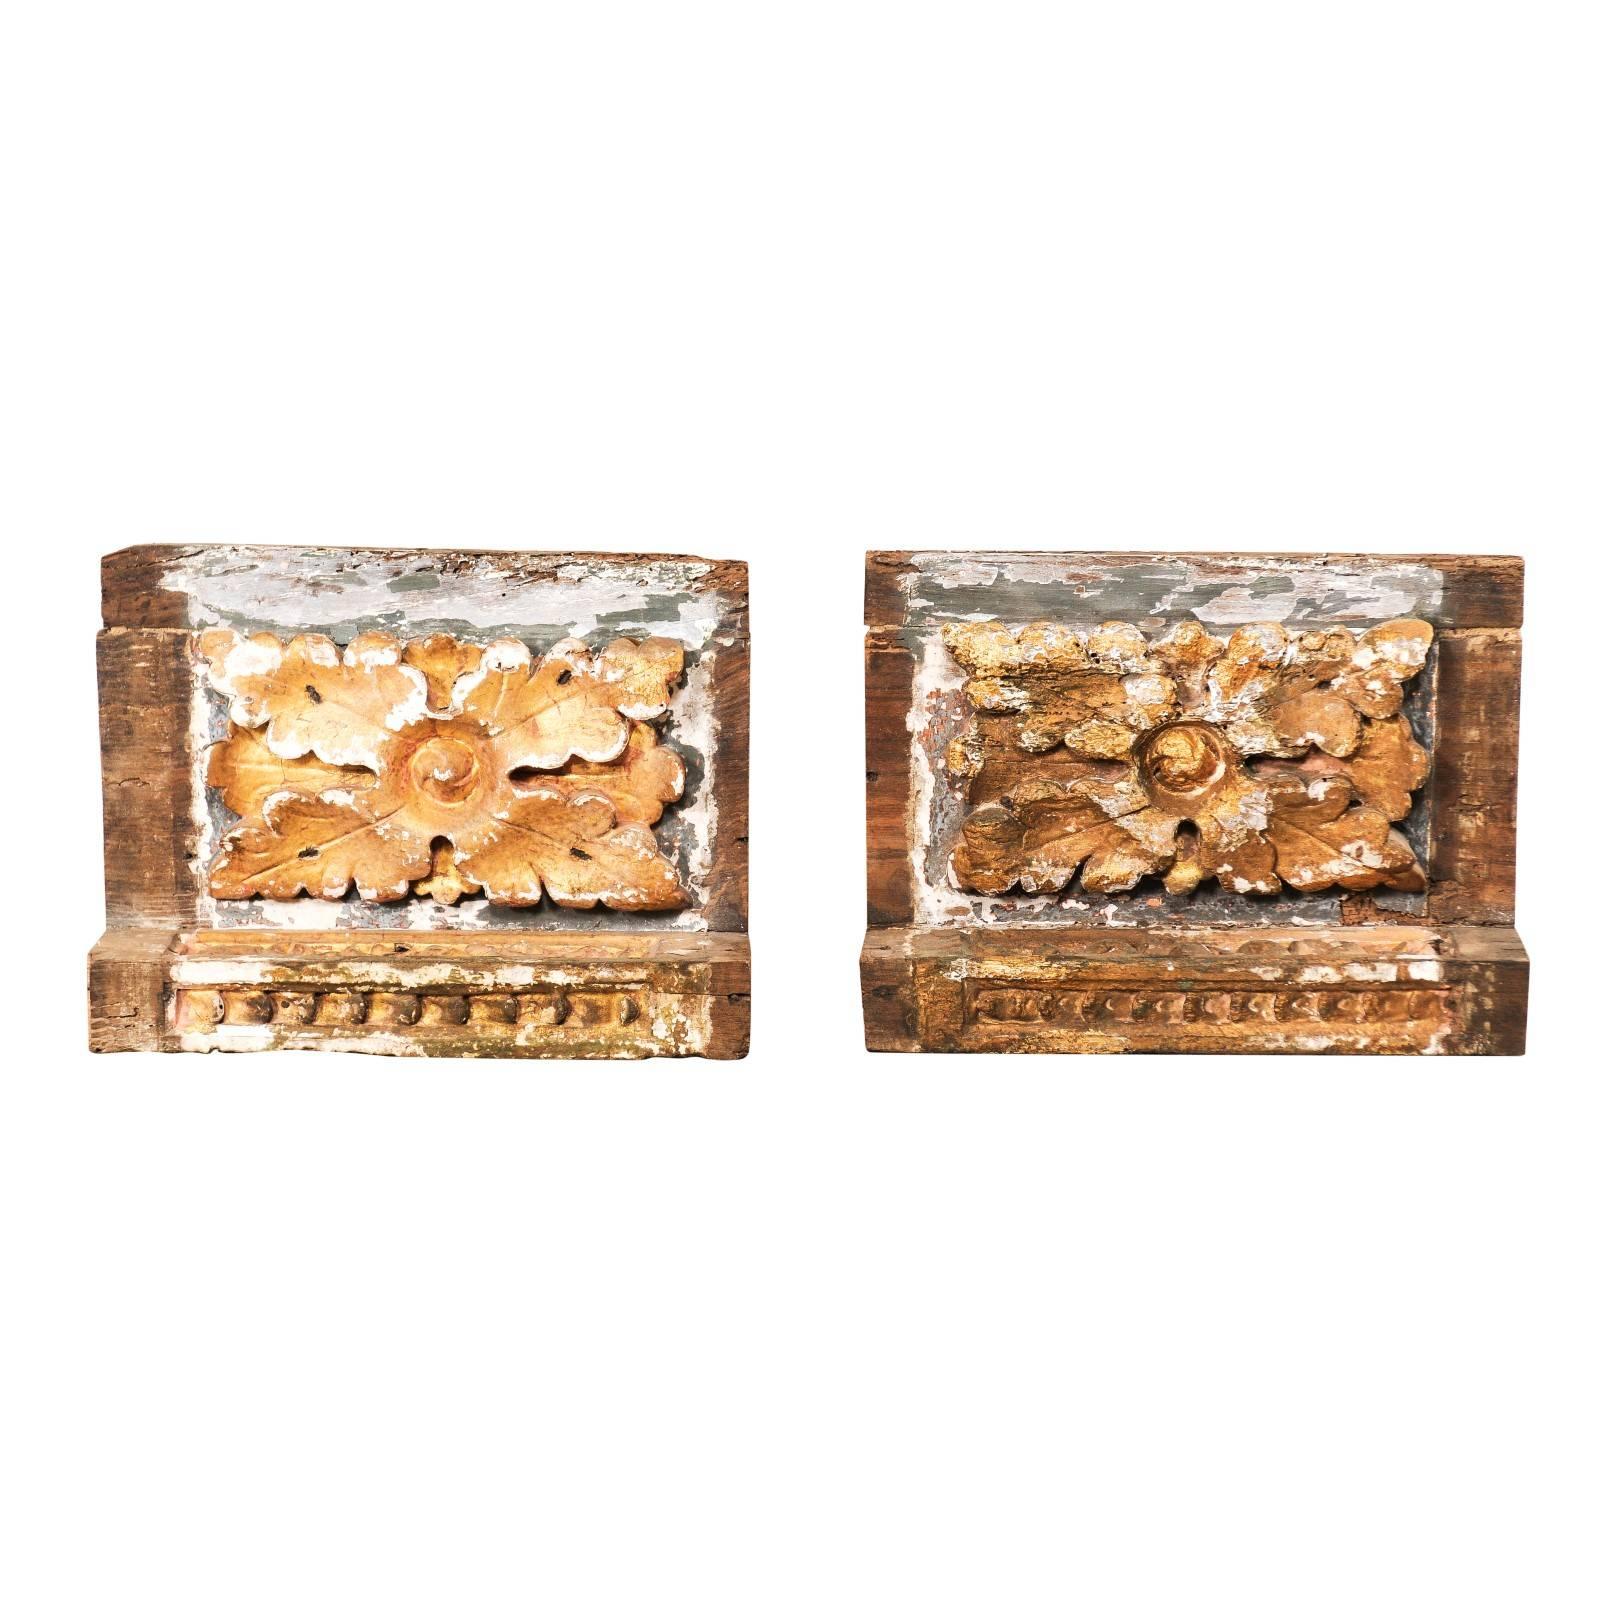 Pair of 18th Century Italian Carved Wood Fragments with Gold Floral Decorations